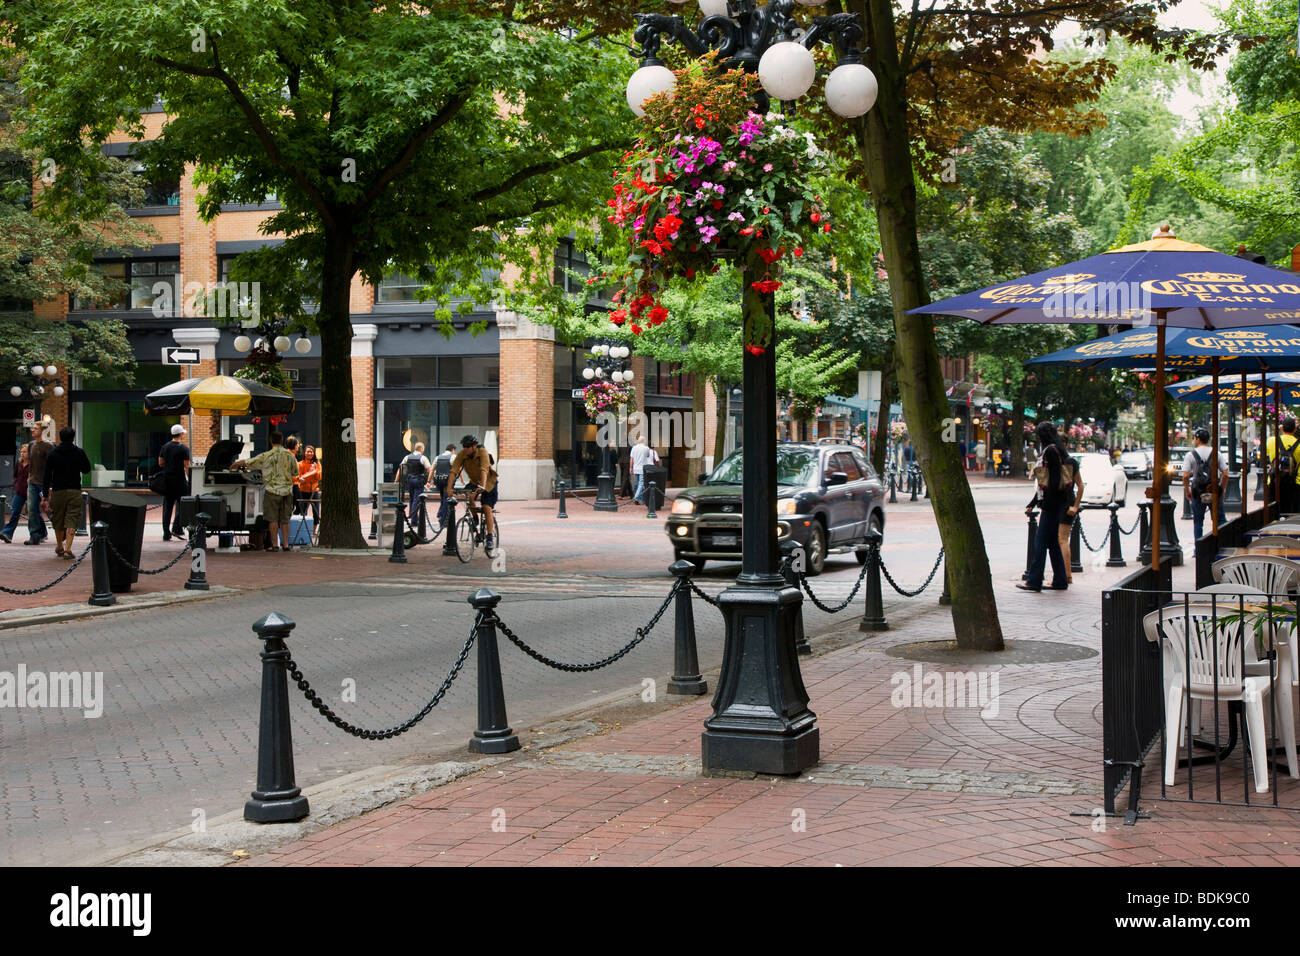 Gastown District, downtown Vancouver, British Columbia, Canada. Stock Photo